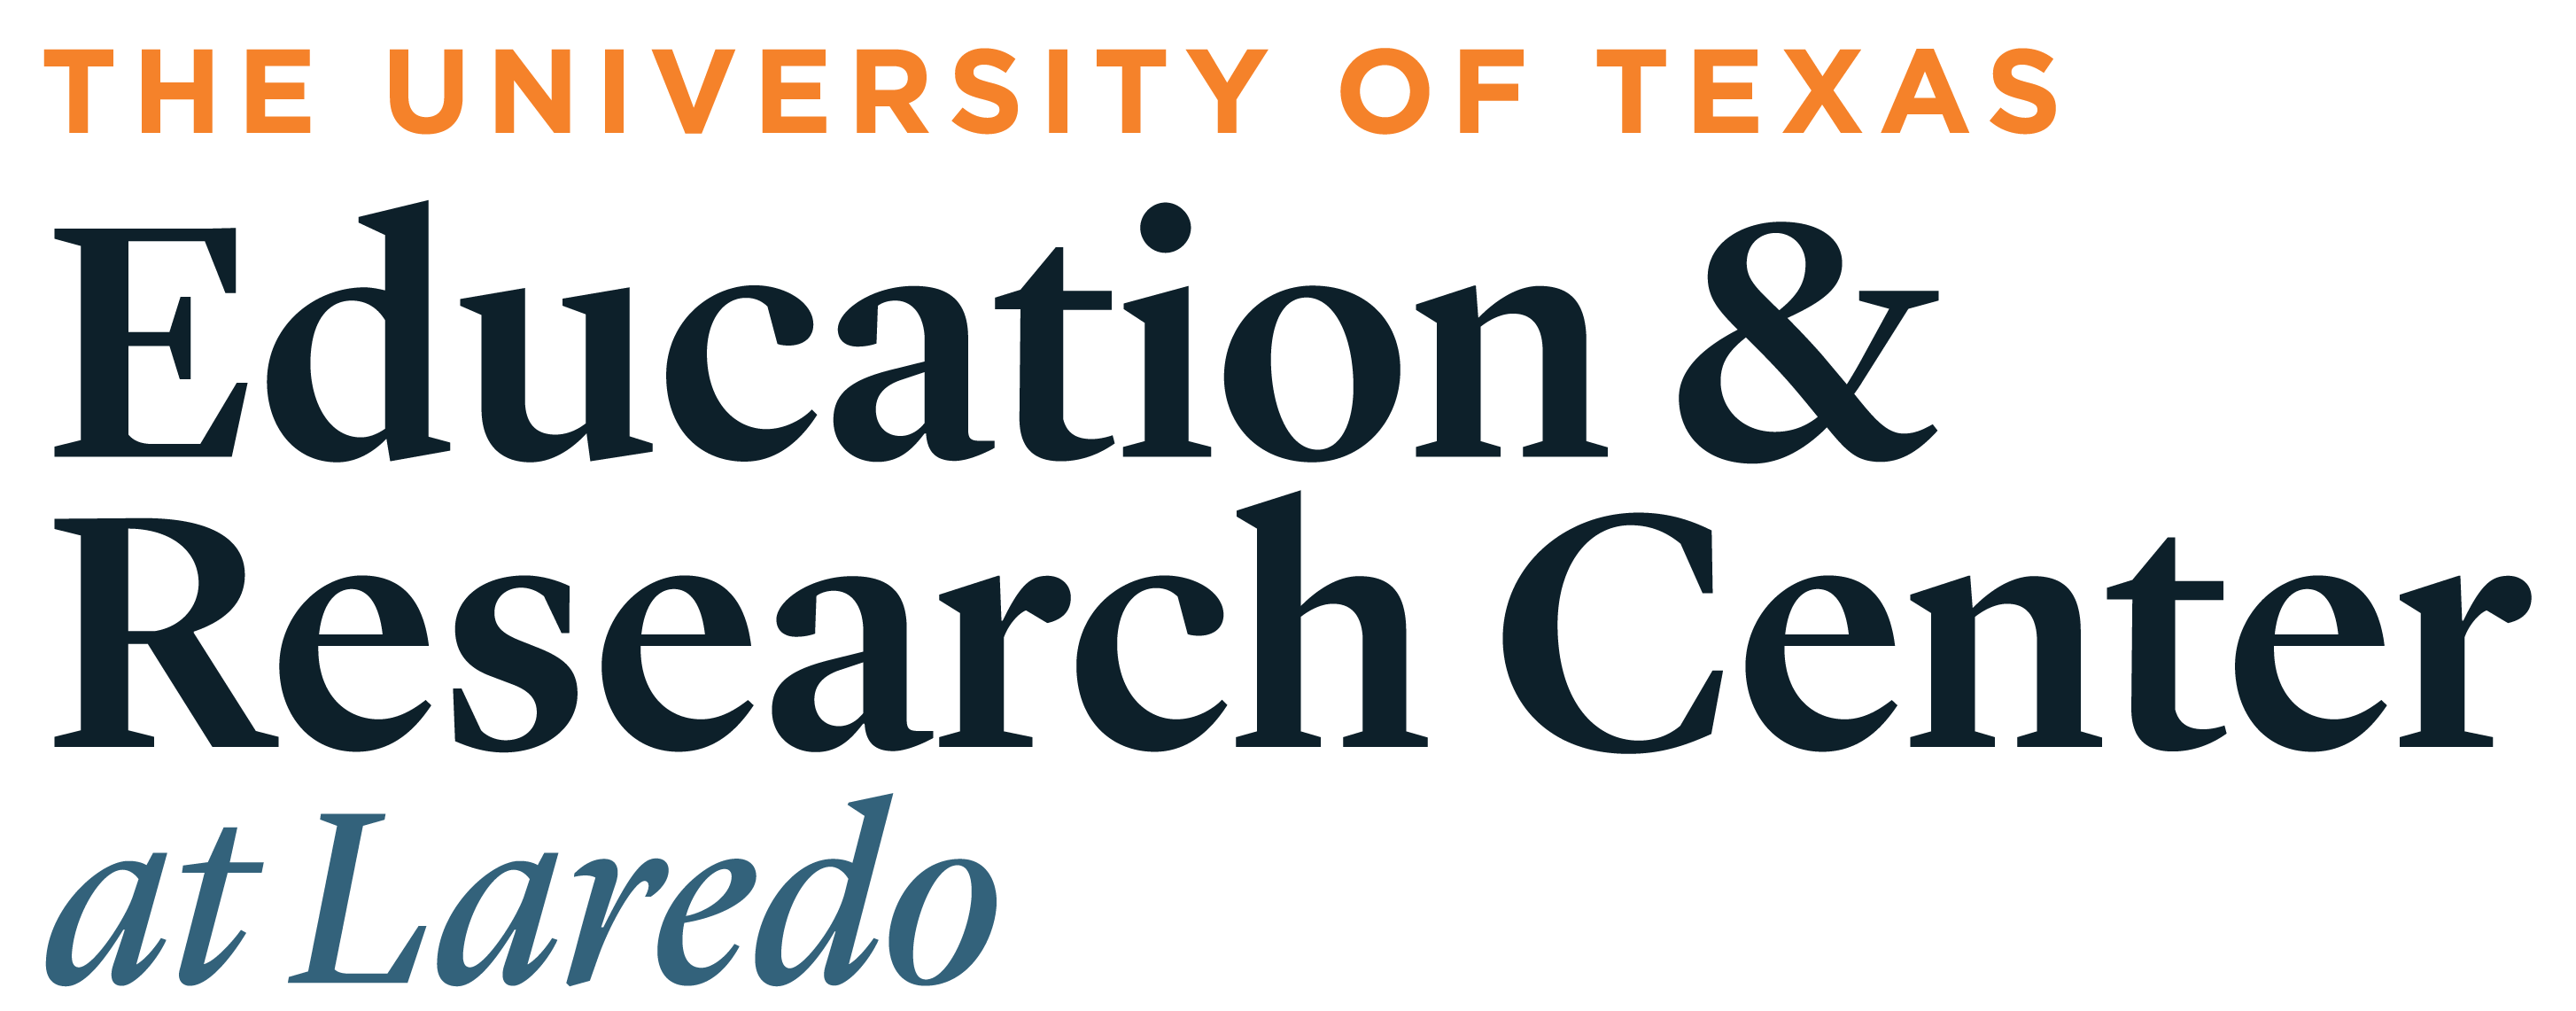 UTS_UT_Center_at_Laredo_Education-and-Research-Center_Logo_Options_Updated_062022_FINALS-01-(1).png